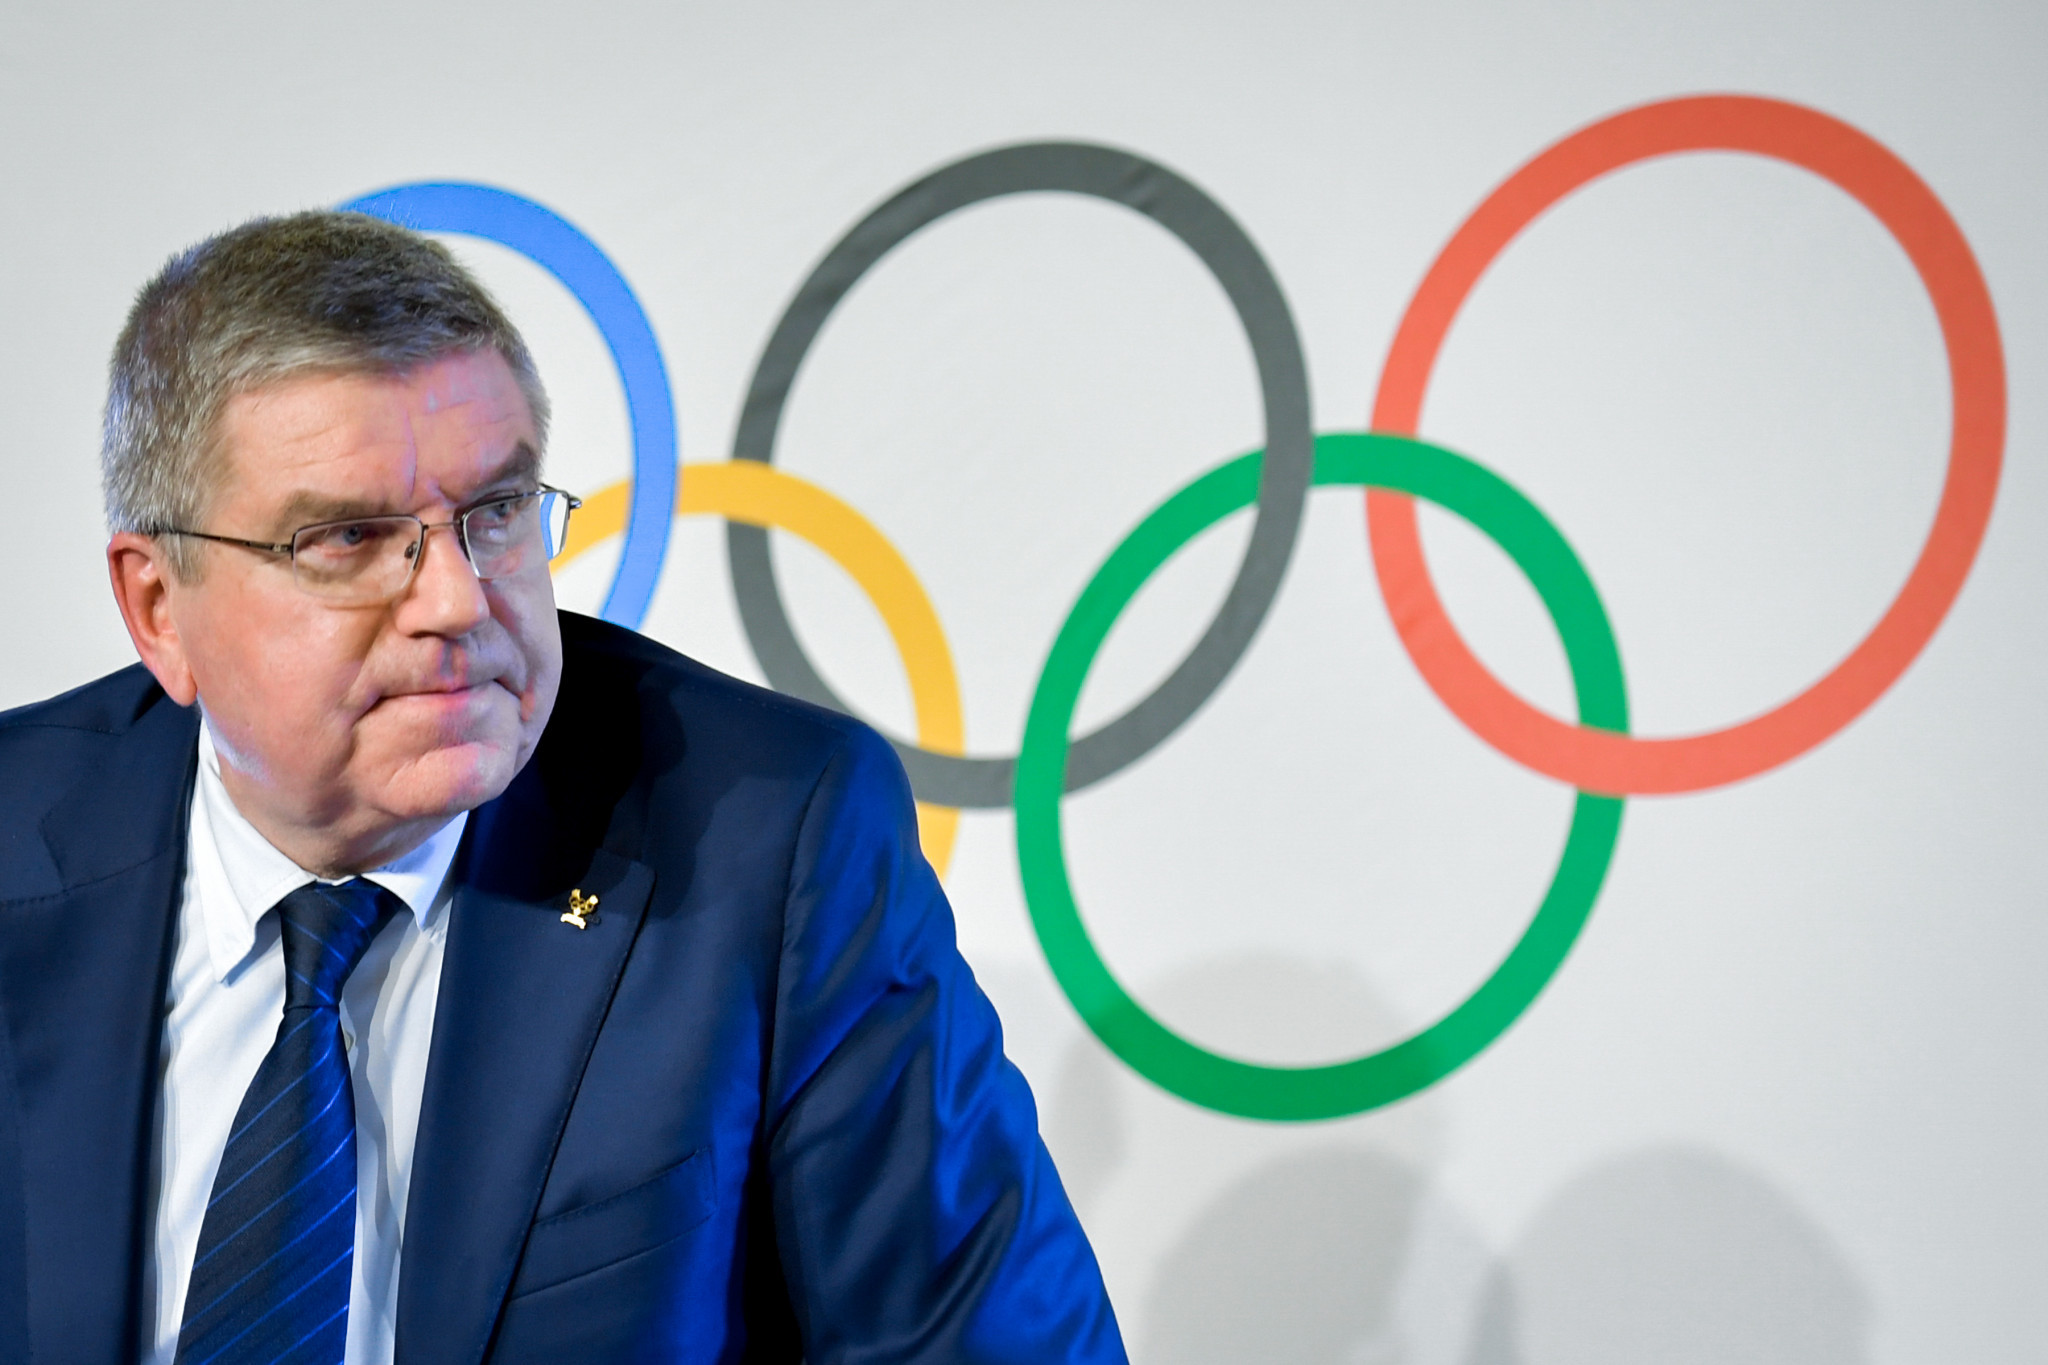 IOC President Thomas Bach says total Russia Olympic ban would be "unethical"